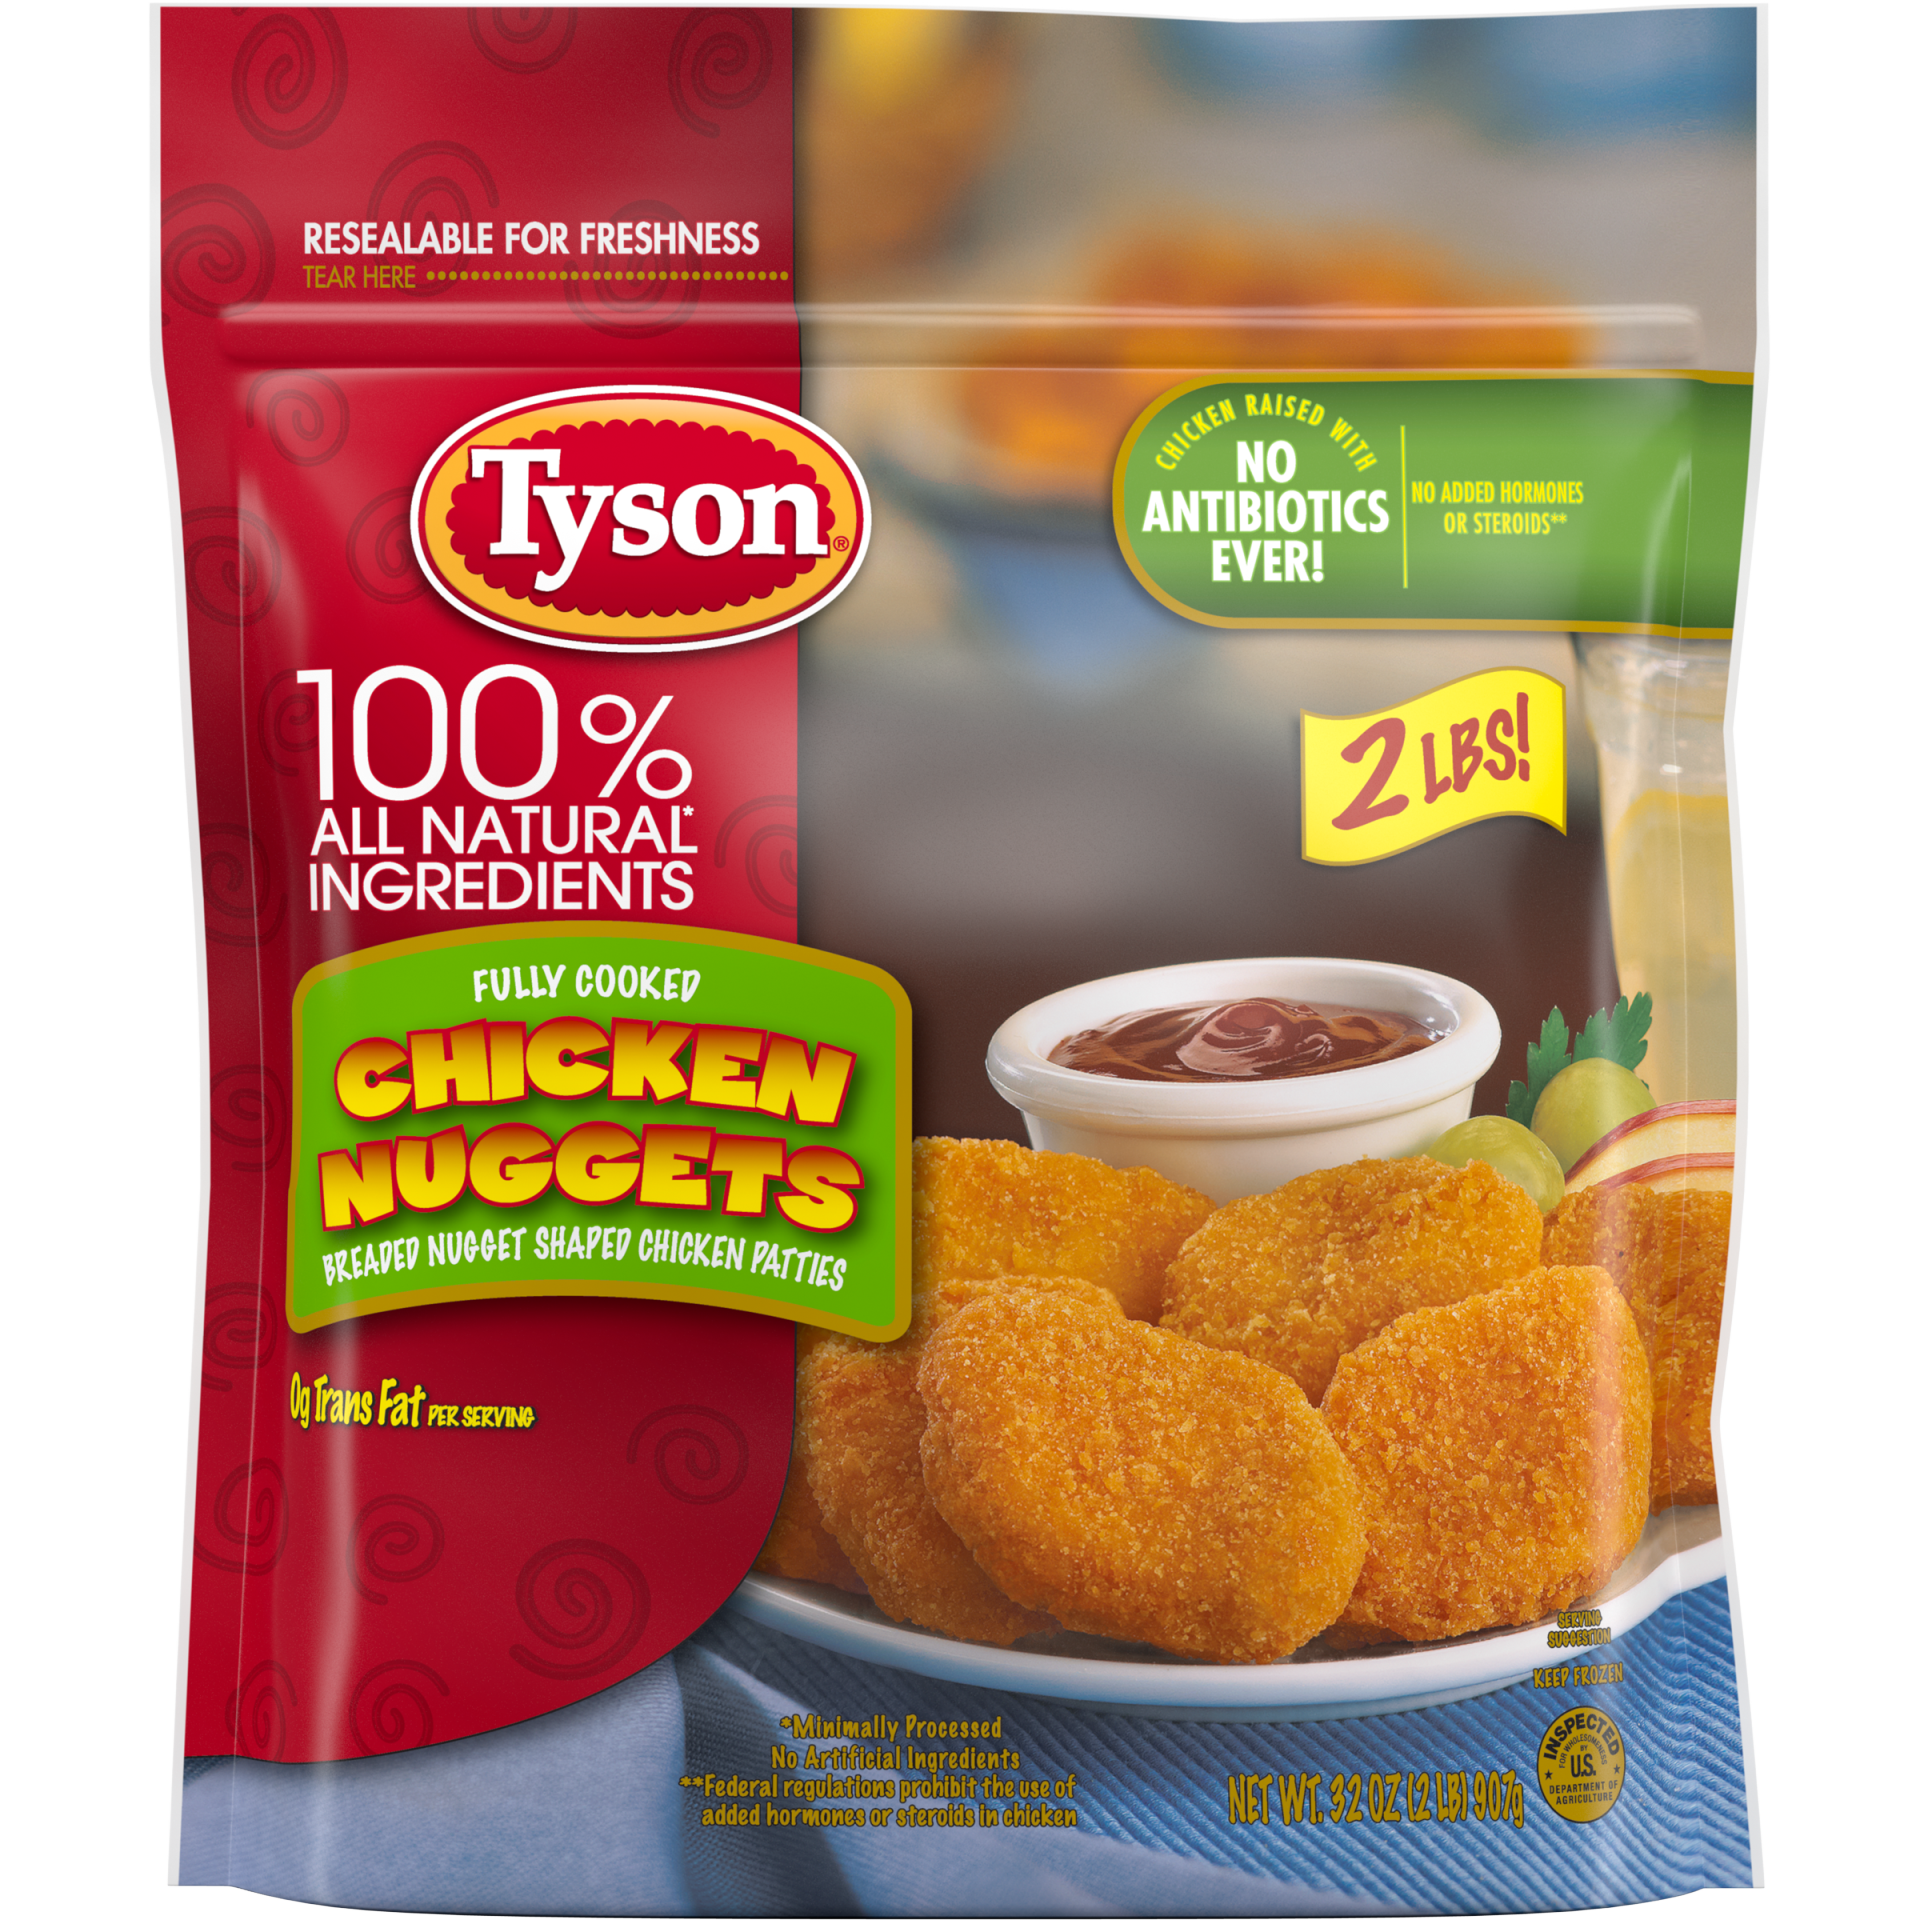 slide 1 of 2, Fully Cooked Frozen Chicken Nuggets, 32 oz